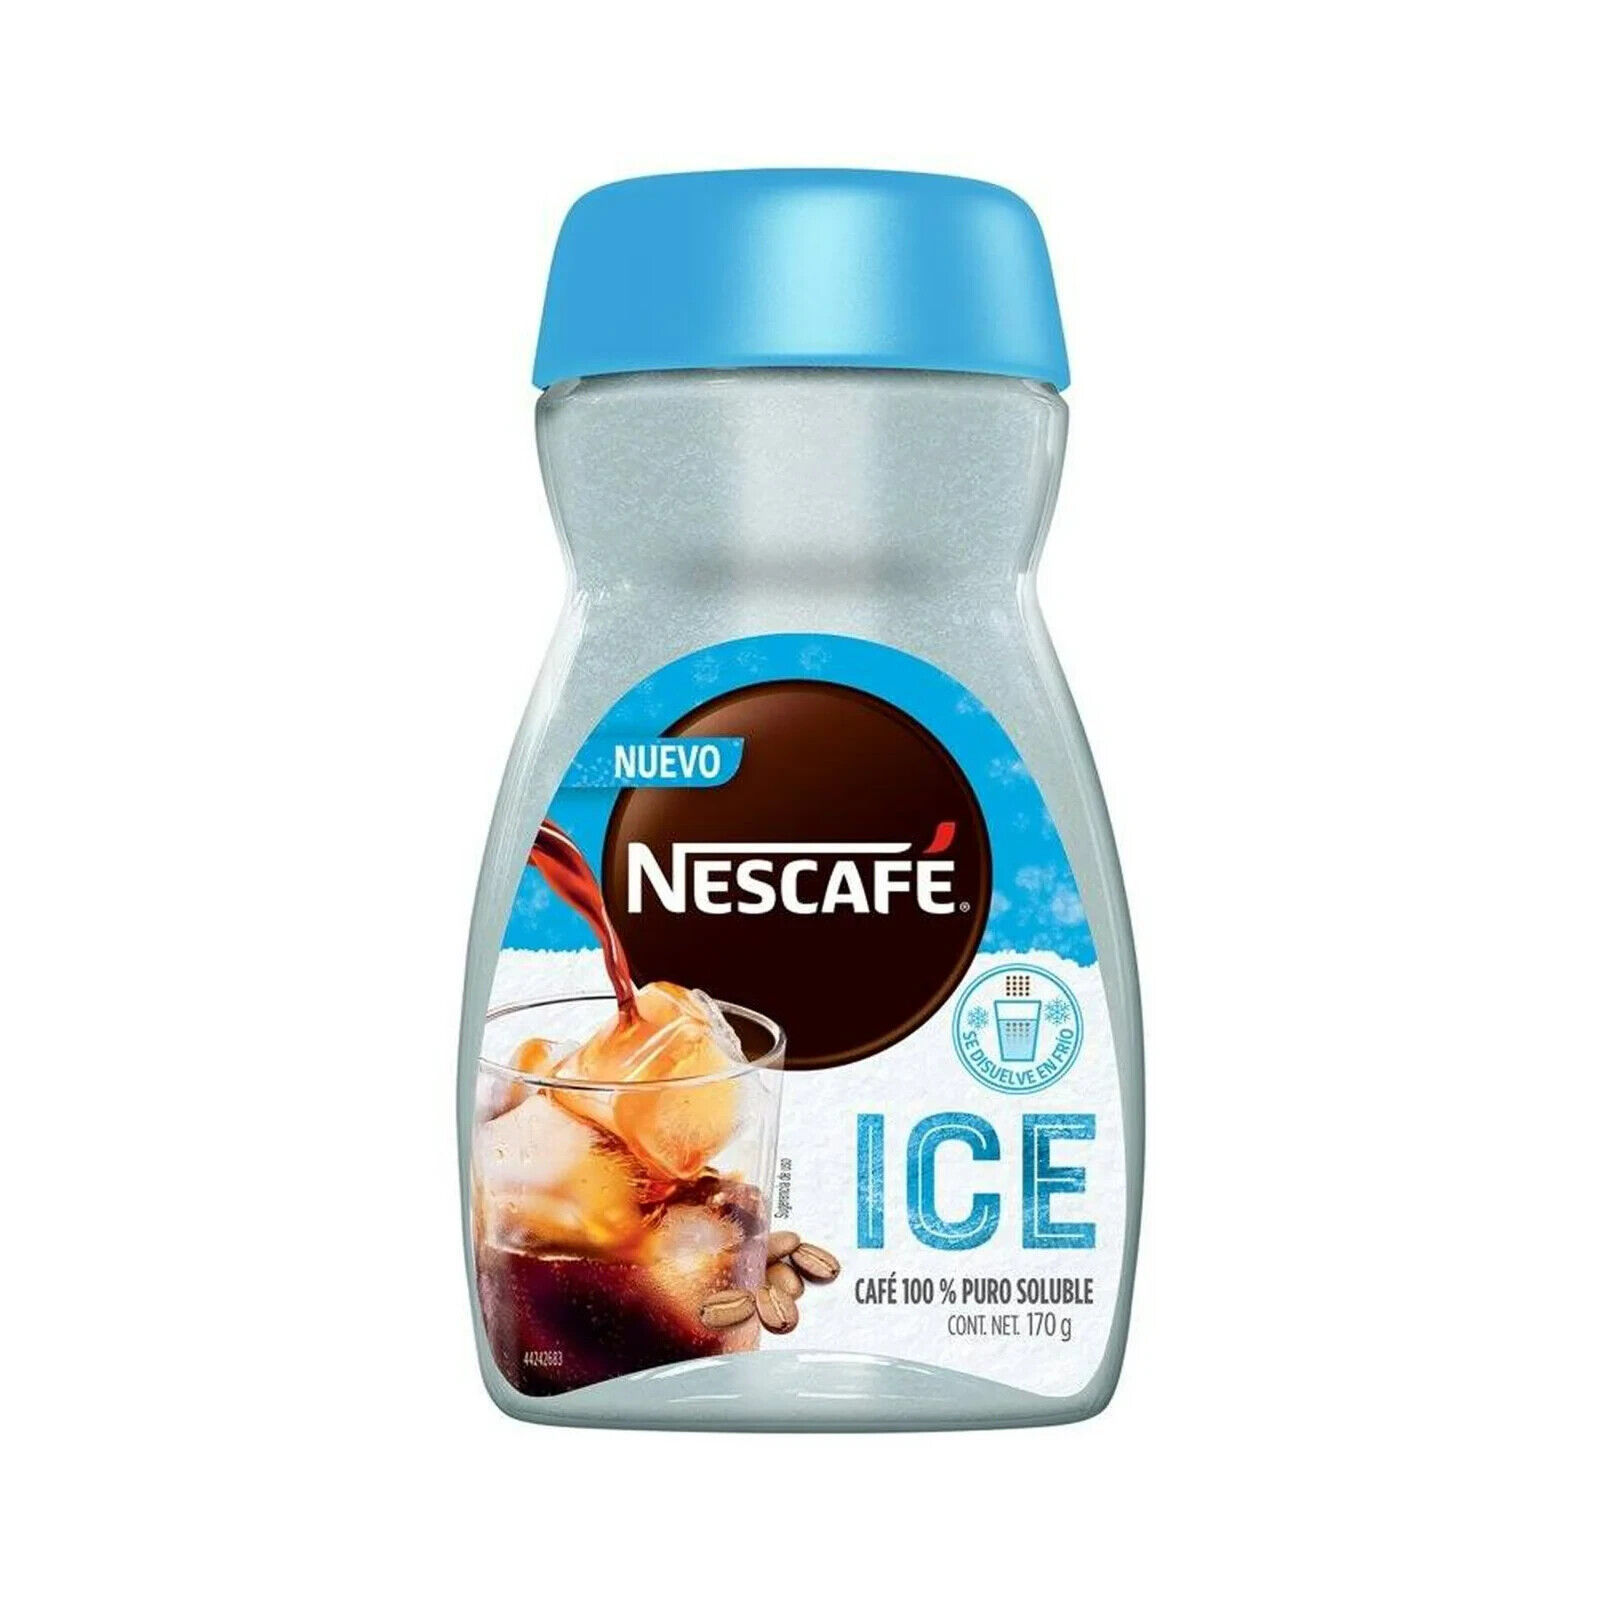 Primary image for 10 x Nescafe Iced Instant Coffee From Canada 100g / 3.5 oz Each Jar - NEW -